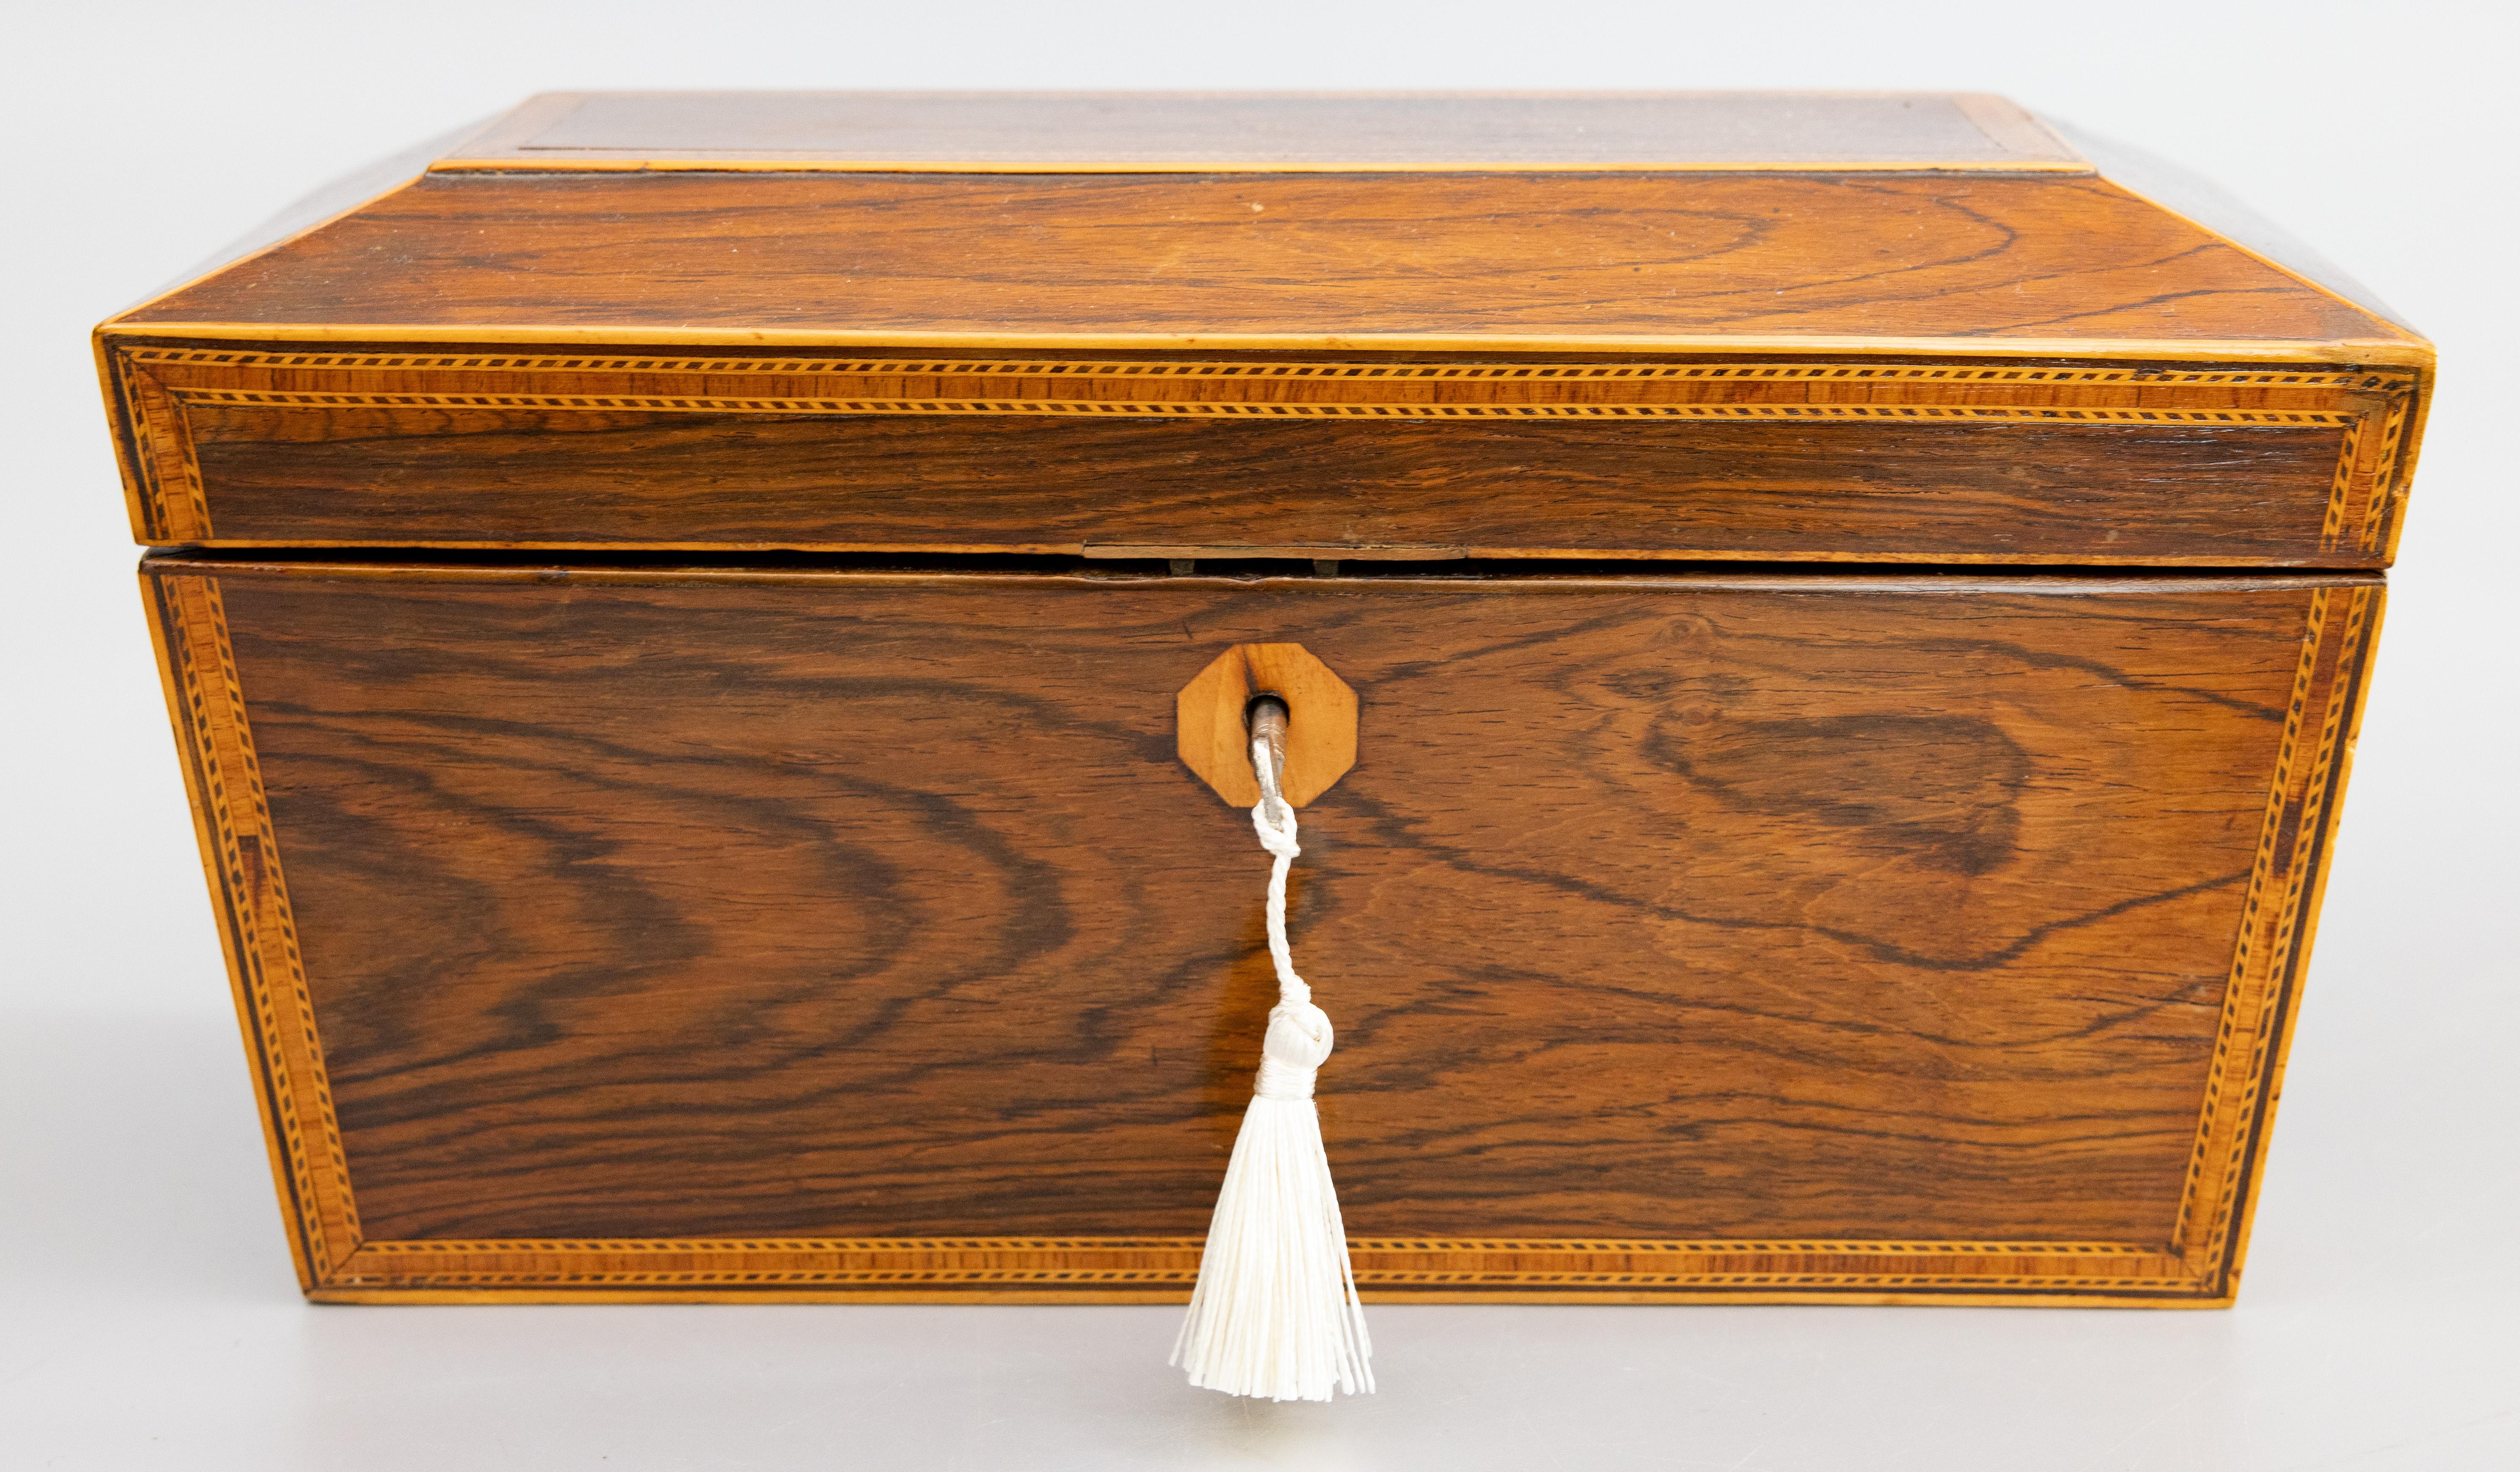 A superb antique English Regency style rosewood sarcophagus casket box with lock and key, circa 1850. This fine antique box has a lovely sarcophagus form accented with contrasting inlaid bands and ormolu lion ring handles. This large hand crafted